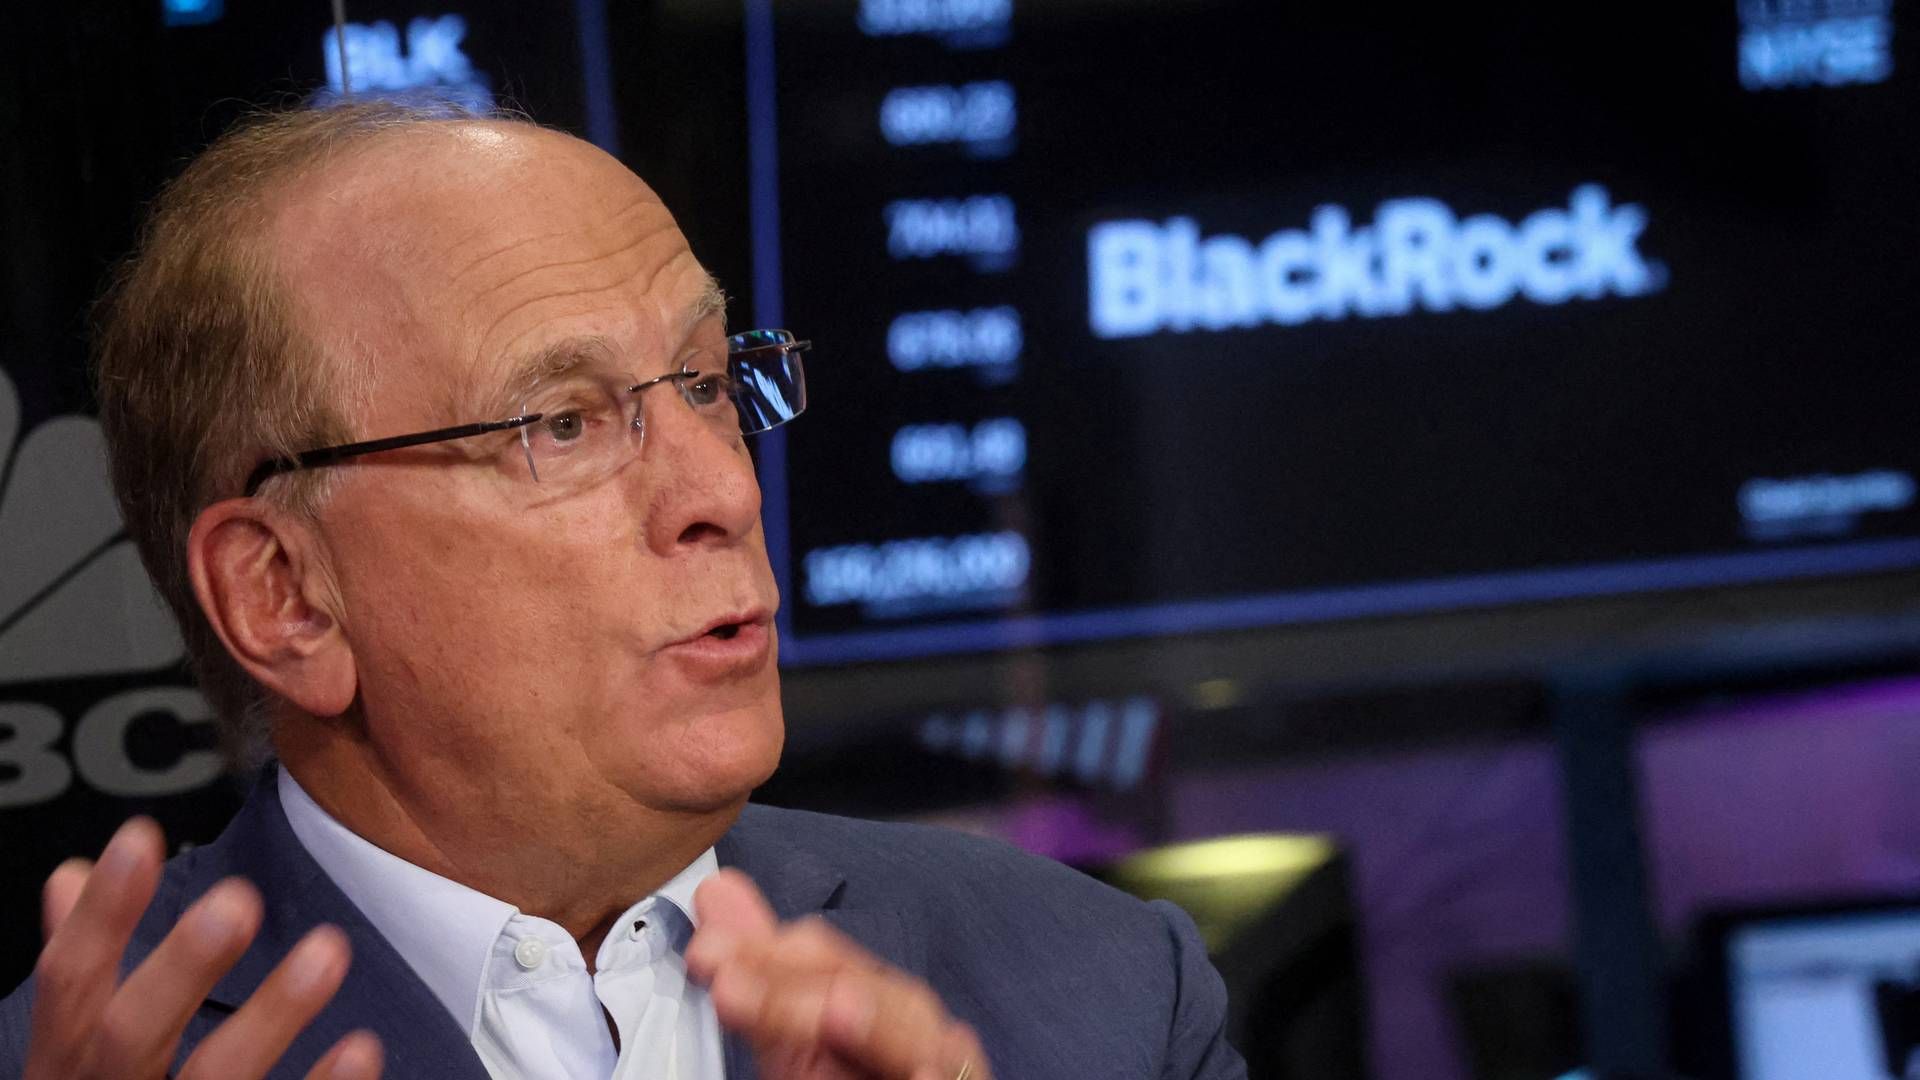 Larry Fink, Chairman and CEO of BlackRock, speaks during an interview with CNBC on the floor of the New York Stock Exchange (NYSE) | Photo: Brendan Mcdermid/Reuters/Ritzau Scanpix